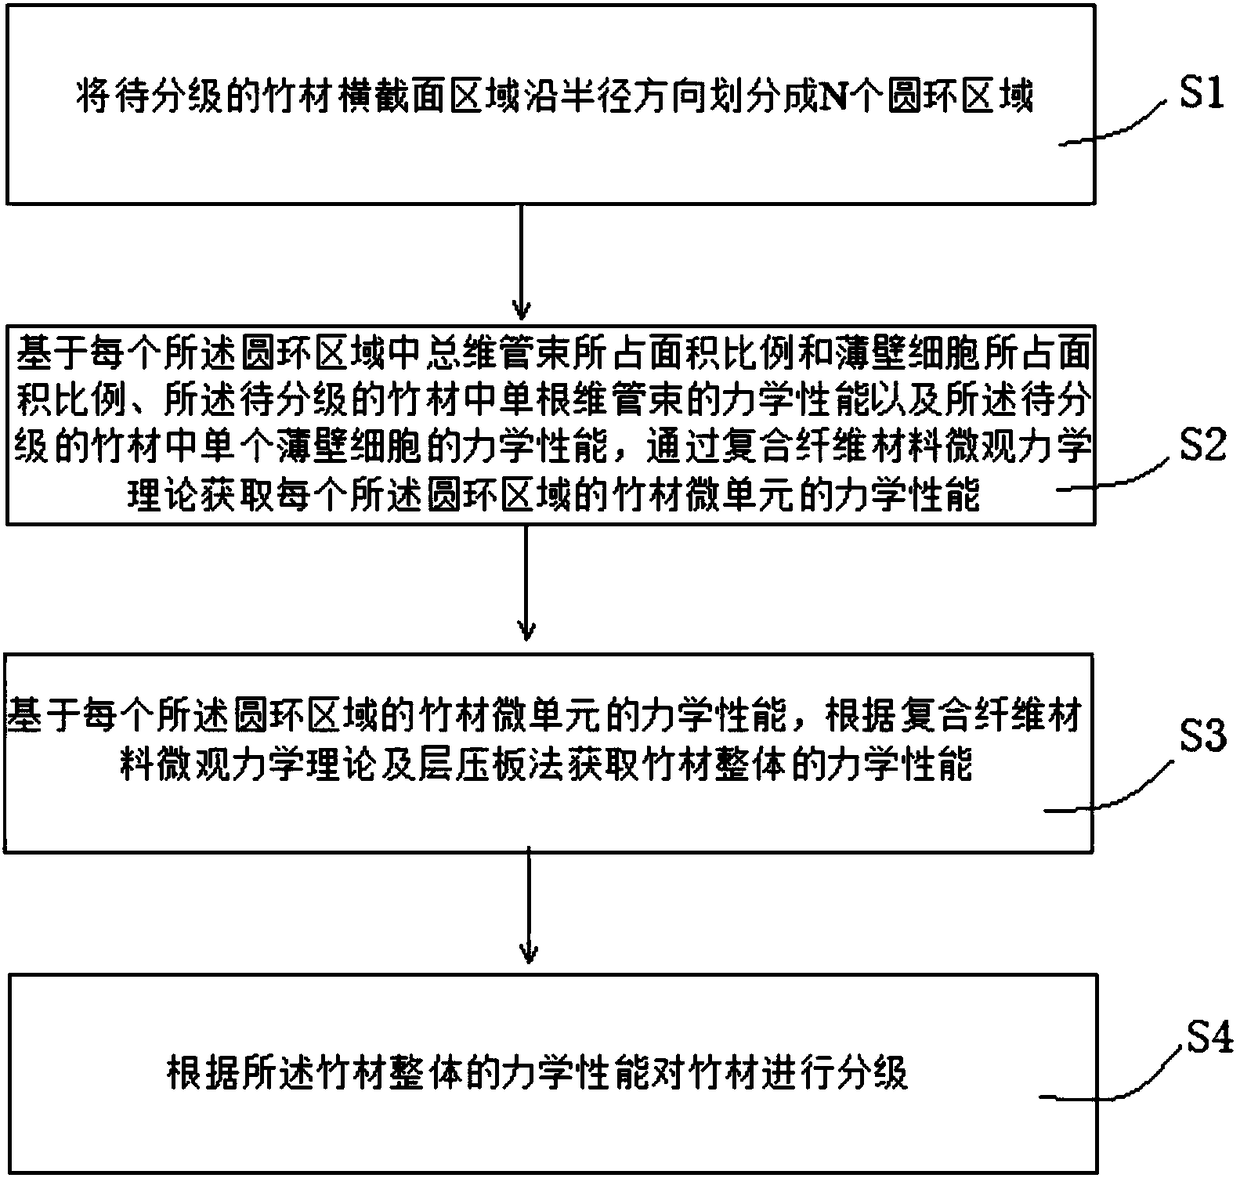 Bamboo material grading method and system